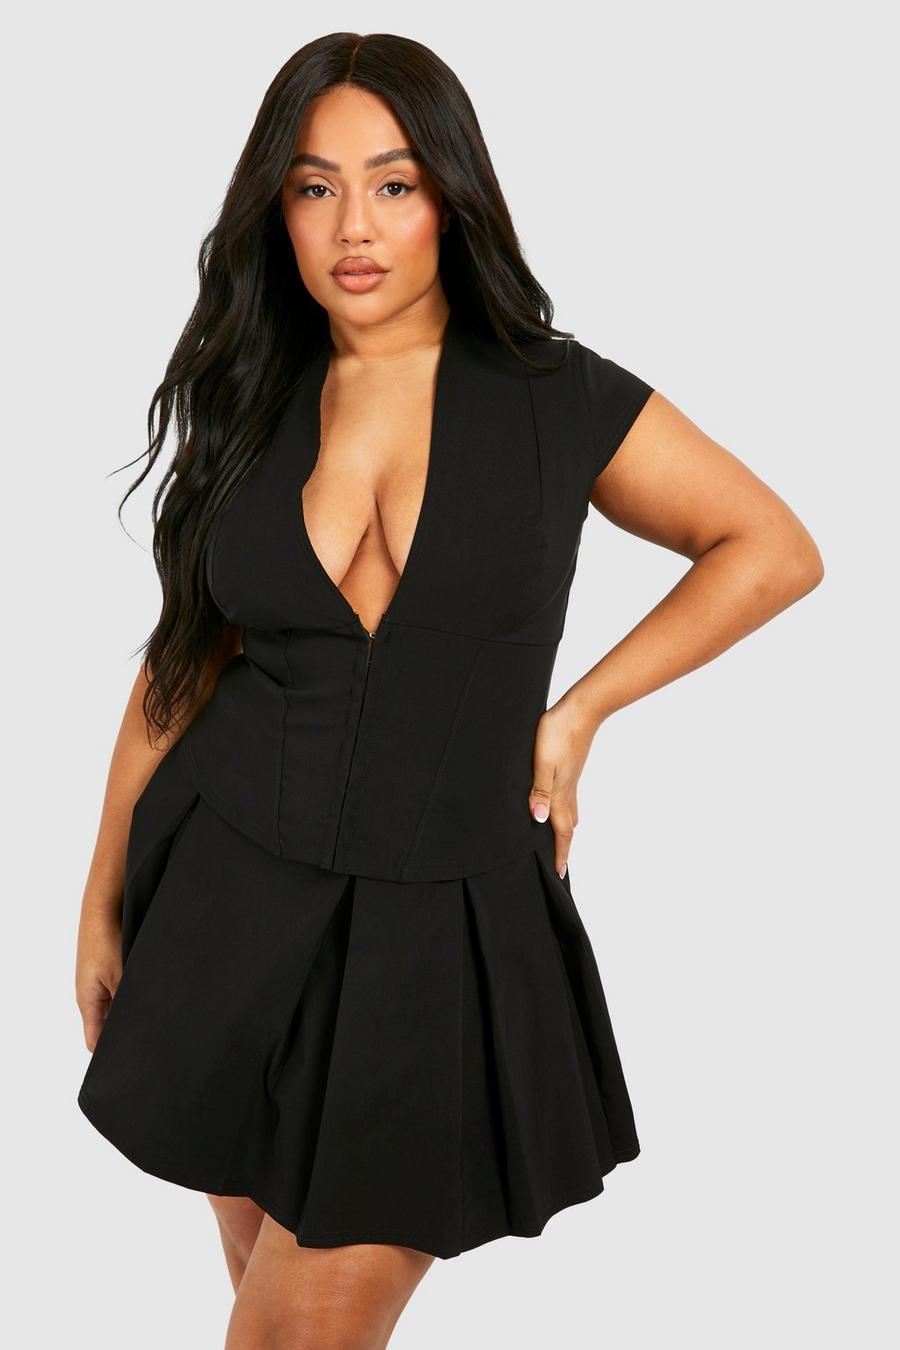 New In Plus Size Clothing, New Plus Size Clothing